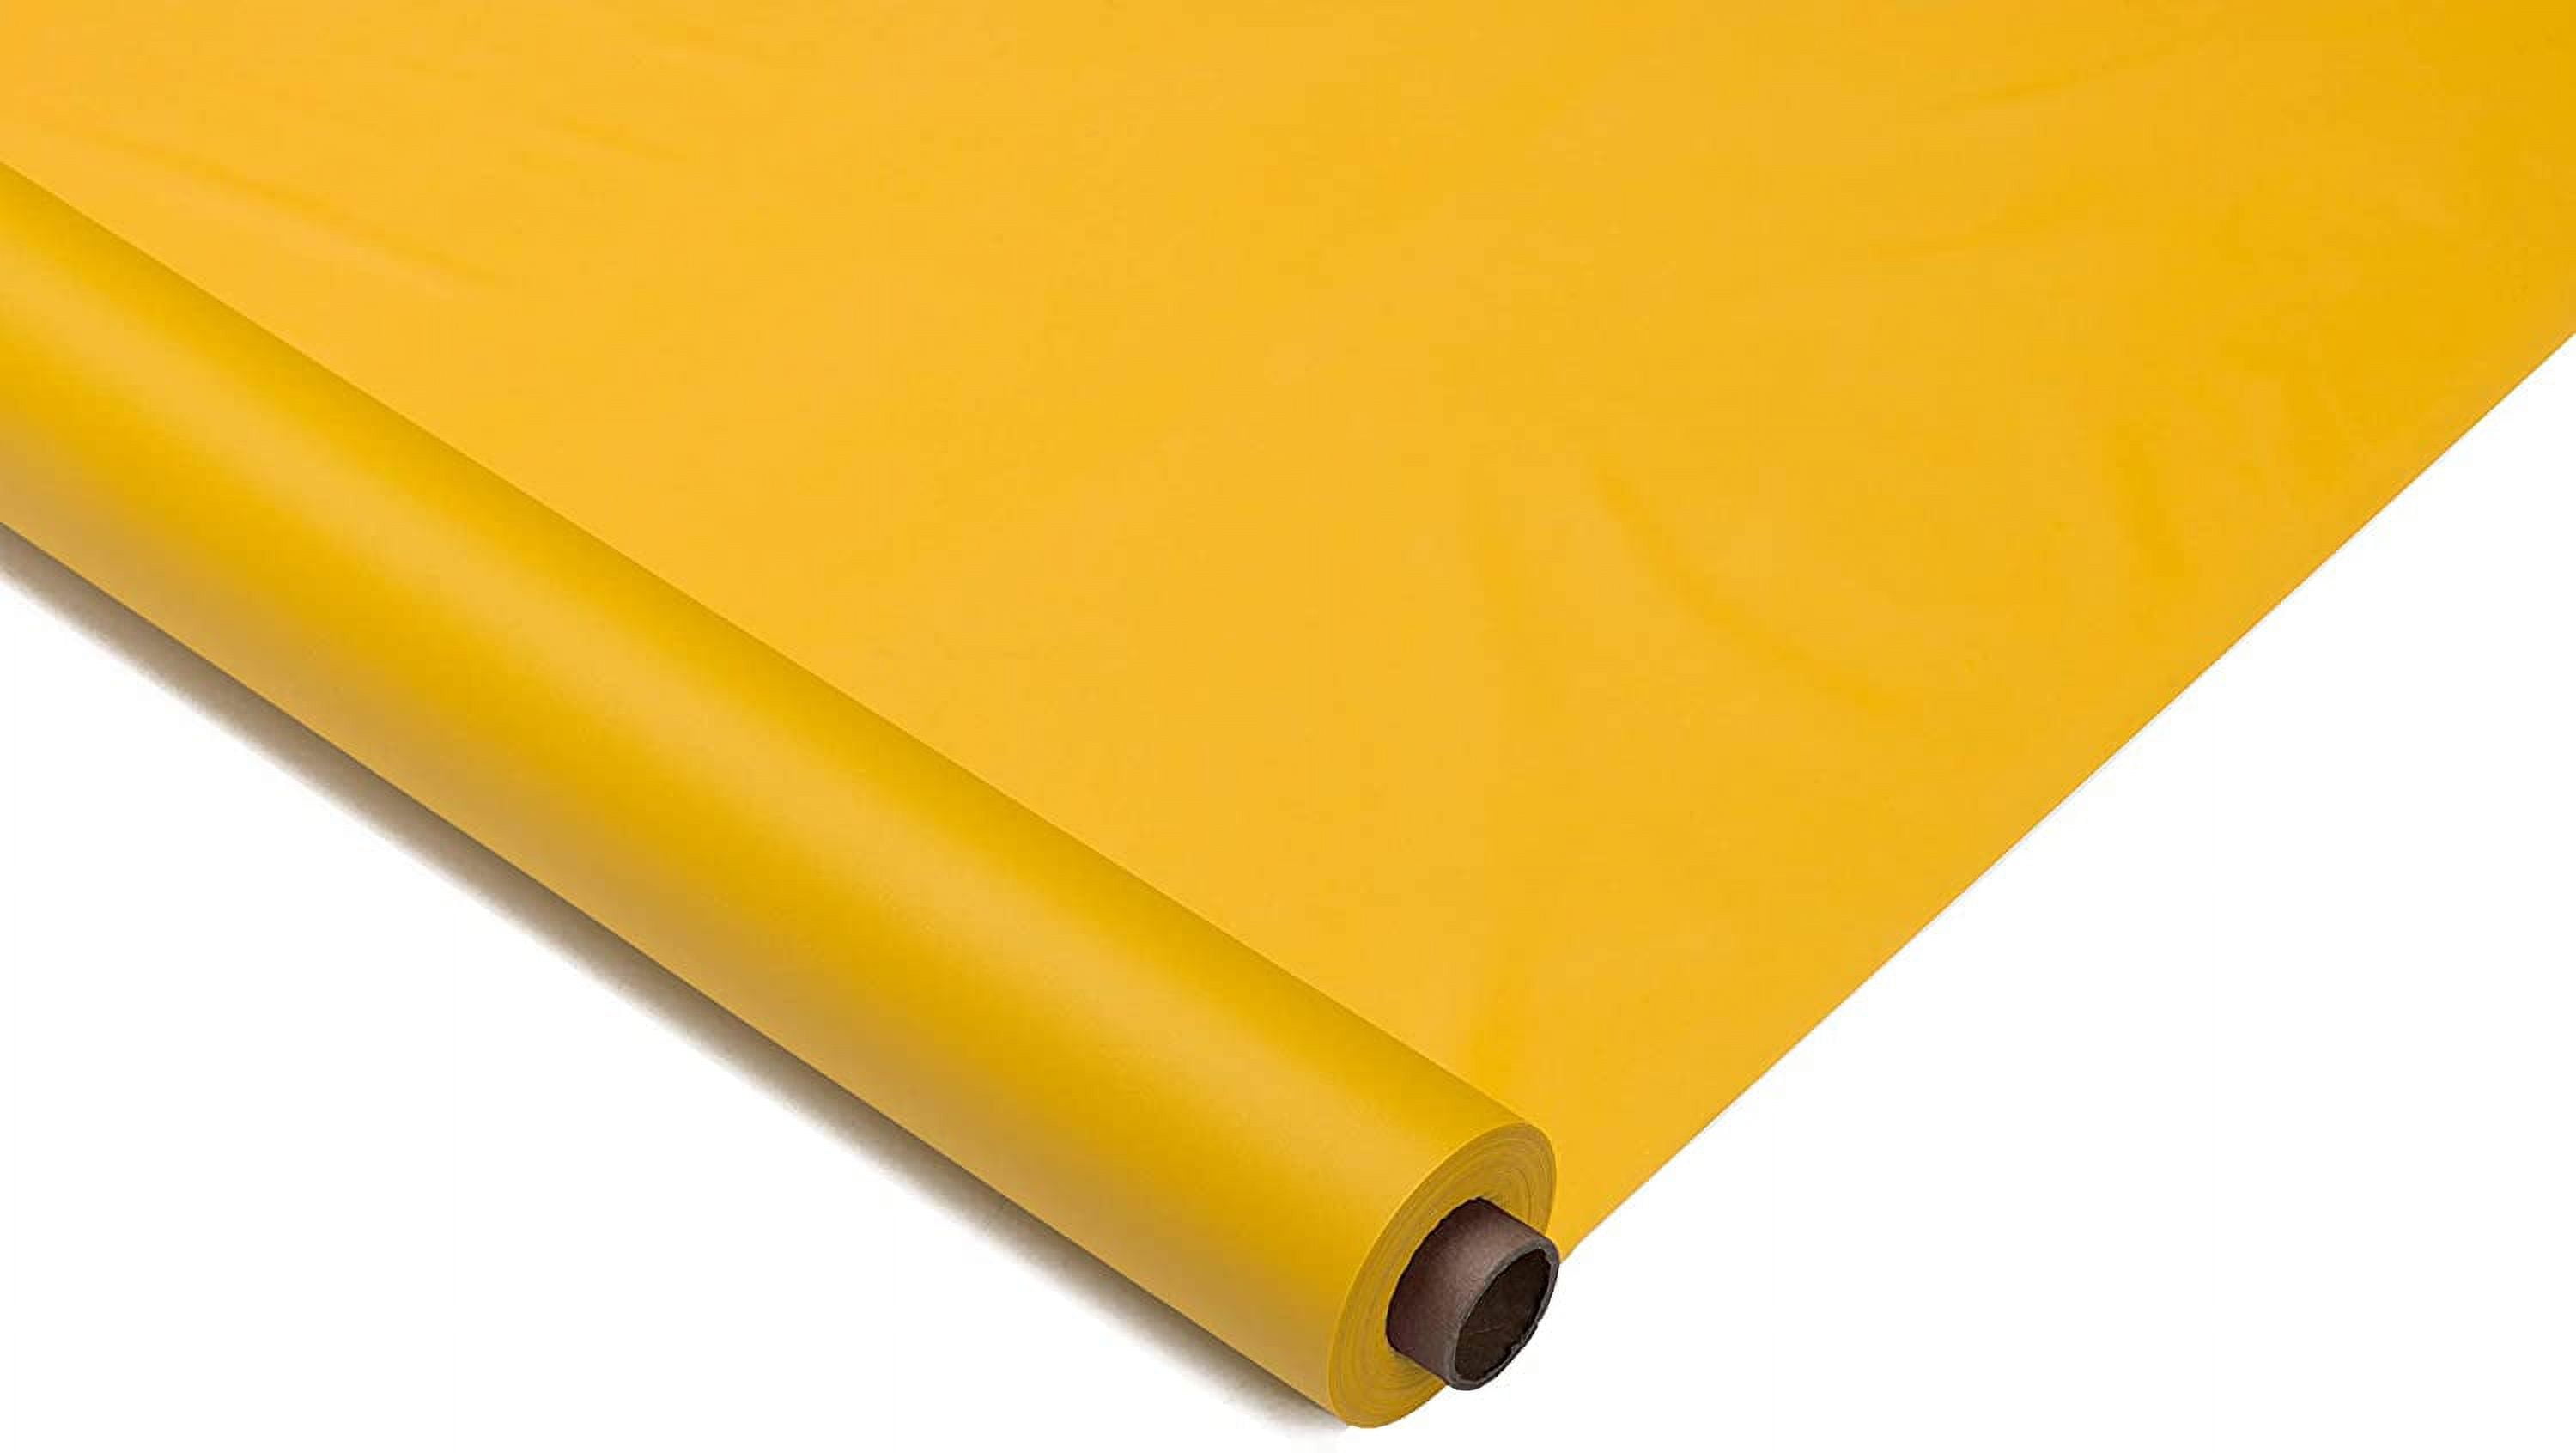 Choice 40 x 100' Tangerine Plastic Table Cover Roll - 4/Case